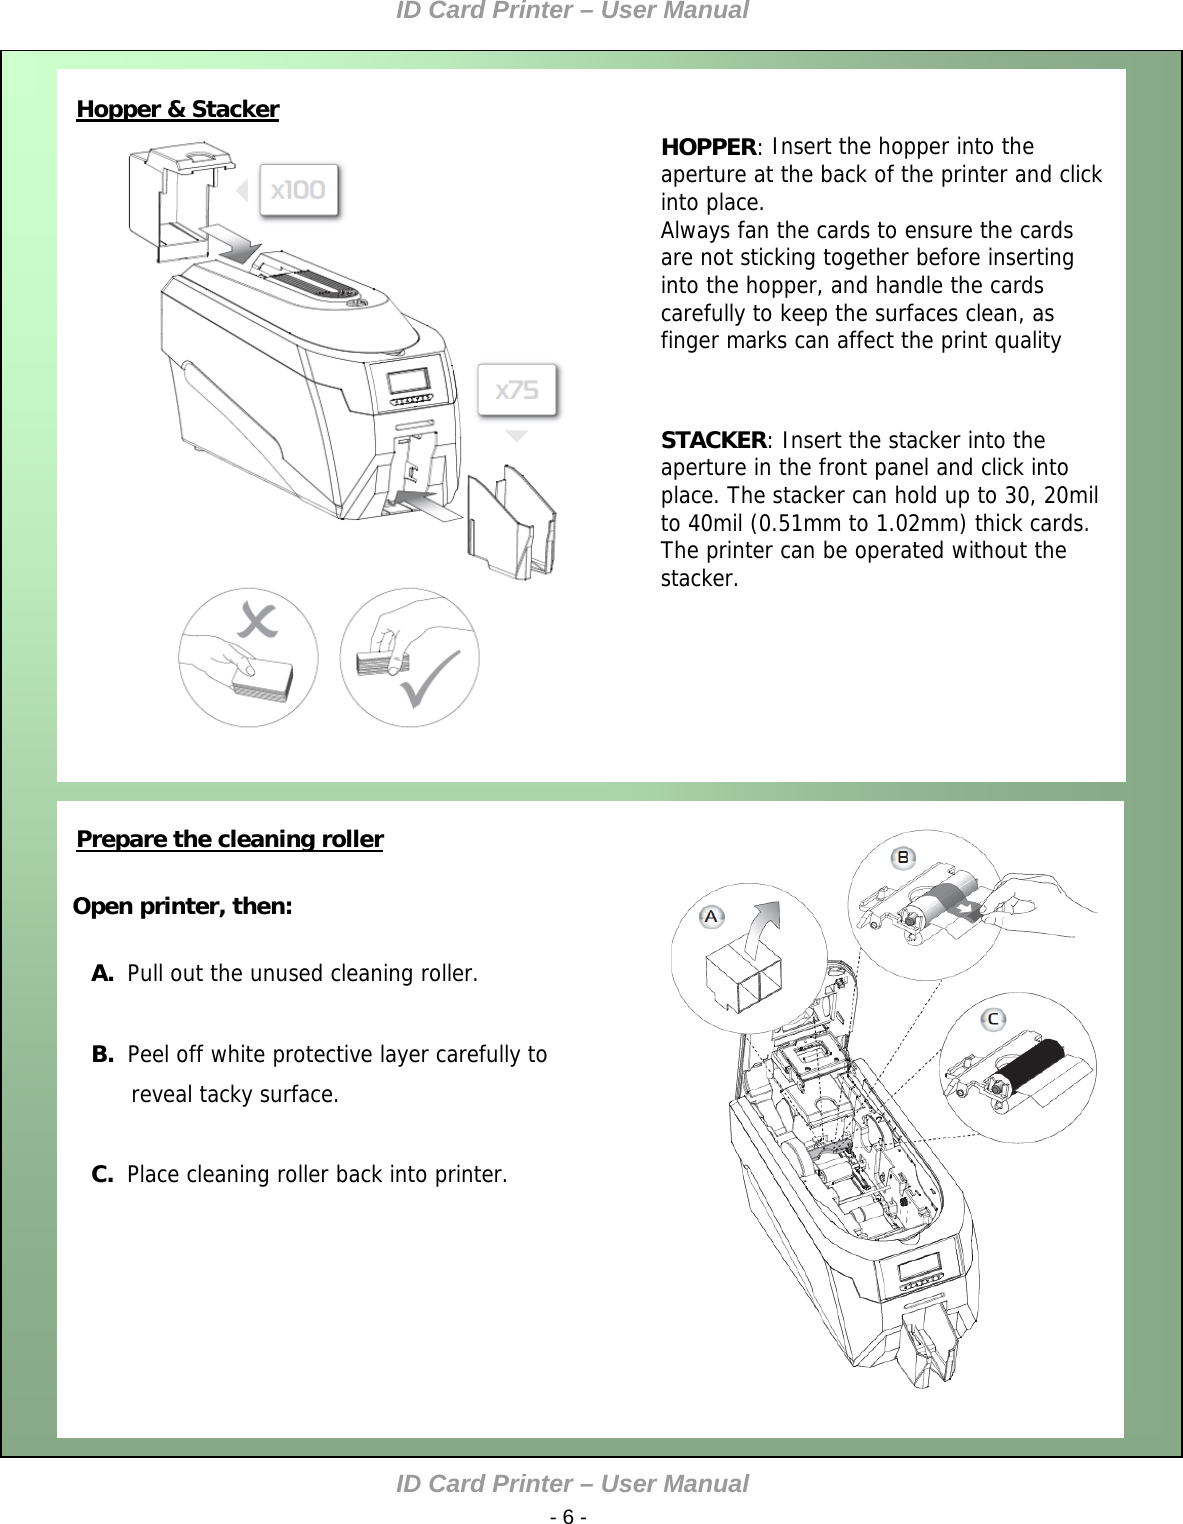 ID Card Printer – User Manual ID Card Printer – User Manual  - 6 -     Open printer, then:  A.  Pull out the unused cleaning roller.  B.  Peel off white protective layer carefully to       reveal tacky surface.  C.  Place cleaning roller back into printer.  Hopper &amp; Stacker   HOPPER: Insert the hopper into the aperture at the back of the printer and click into place. Always fan the cards to ensure the cards are not sticking together before inserting into the hopper, and handle the cards carefully to keep the surfaces clean, as finger marks can affect the print quality    STACKER: Insert the stacker into the aperture in the front panel and click into place. The stacker can hold up to 30, 20mil to 40mil (0.51mm to 1.02mm) thick cards. The printer can be operated without the stacker.              Prepare the cleaning roller         